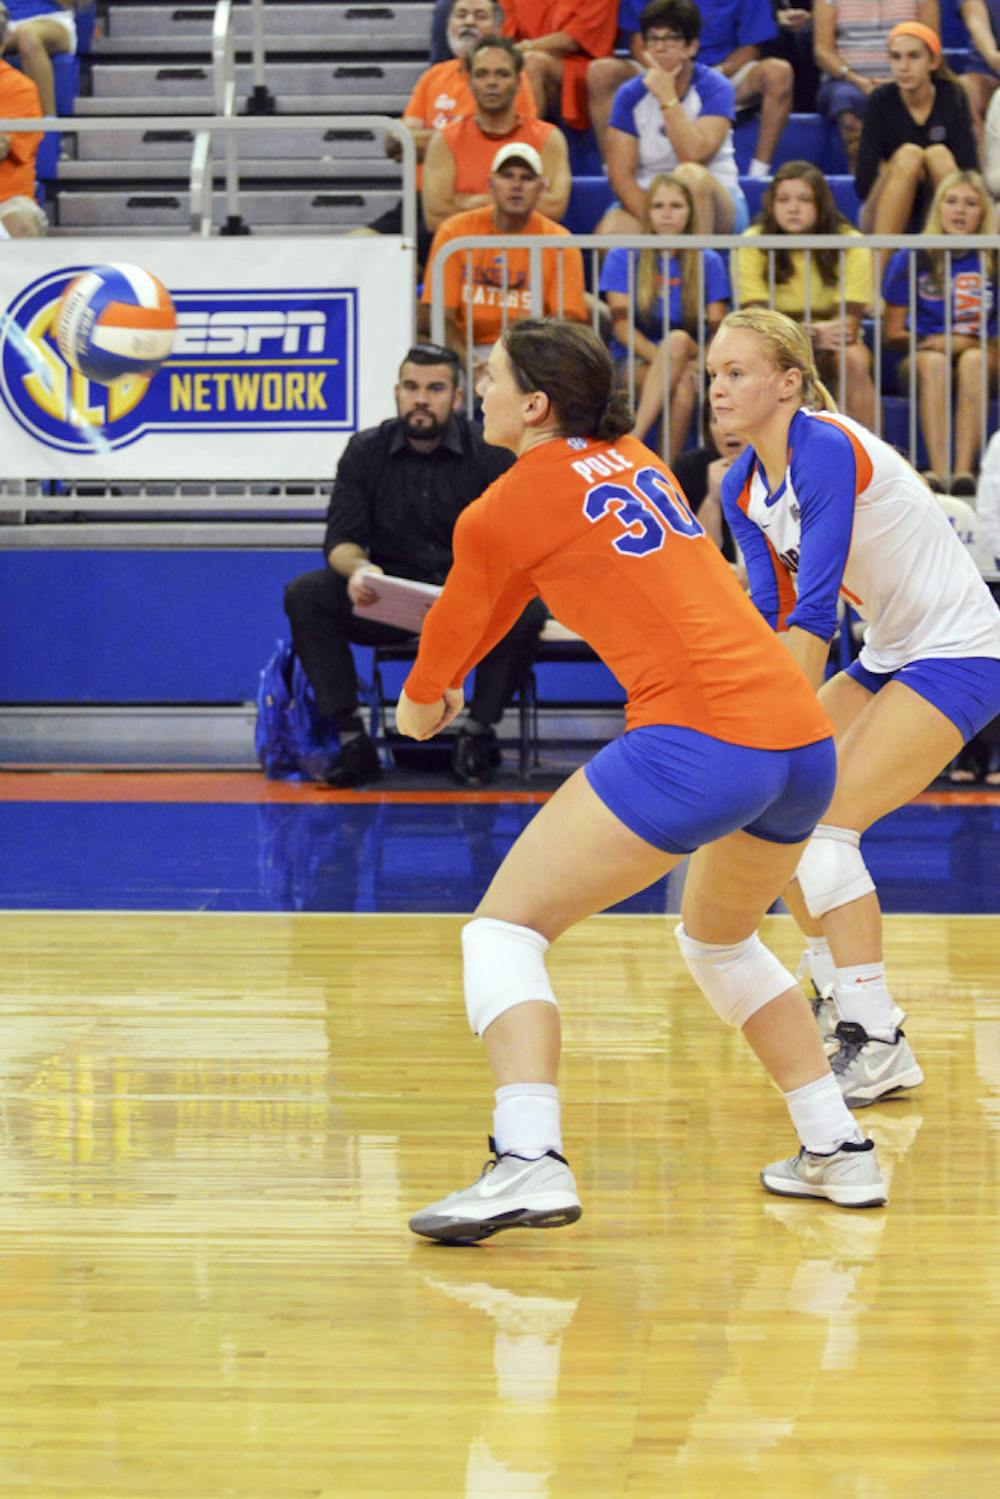 <p>Holly Pole (30) and Maddy Monserez attempt to dig the ball during Florida's 3-0 win against Ole Miss on Sunday in the O'Connell Center.</p>